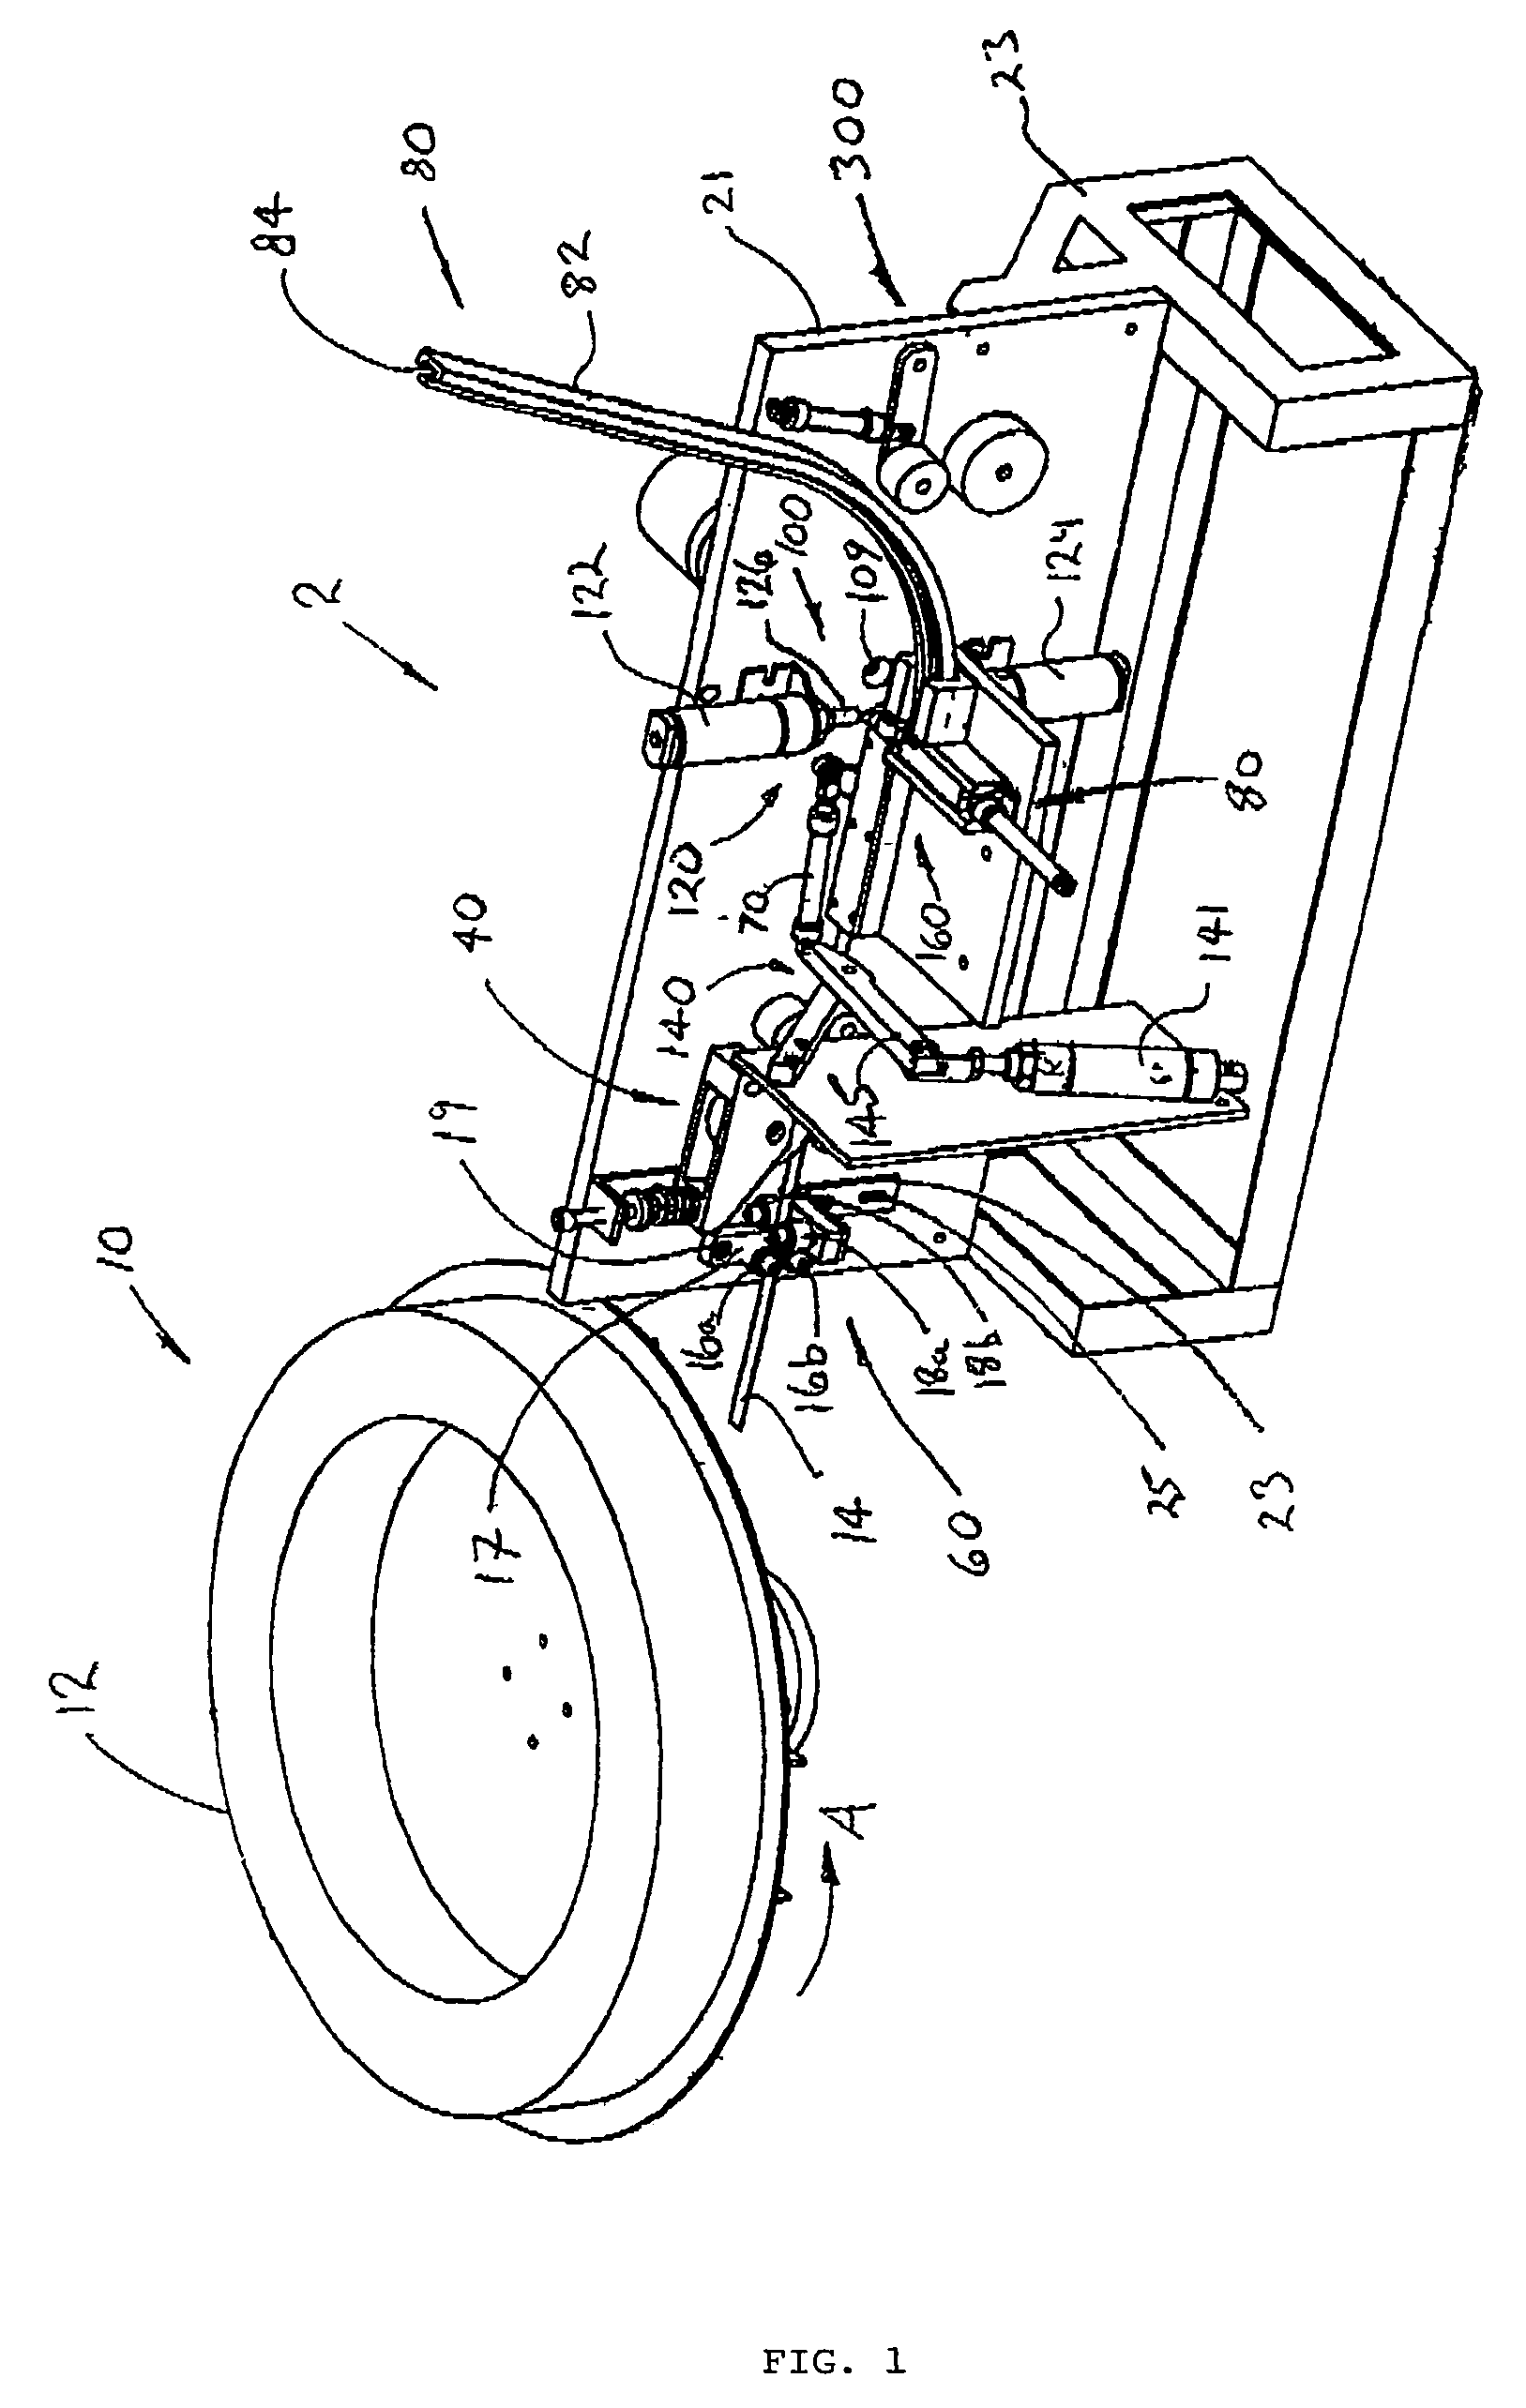 Method of manufacturing a band with a fastener